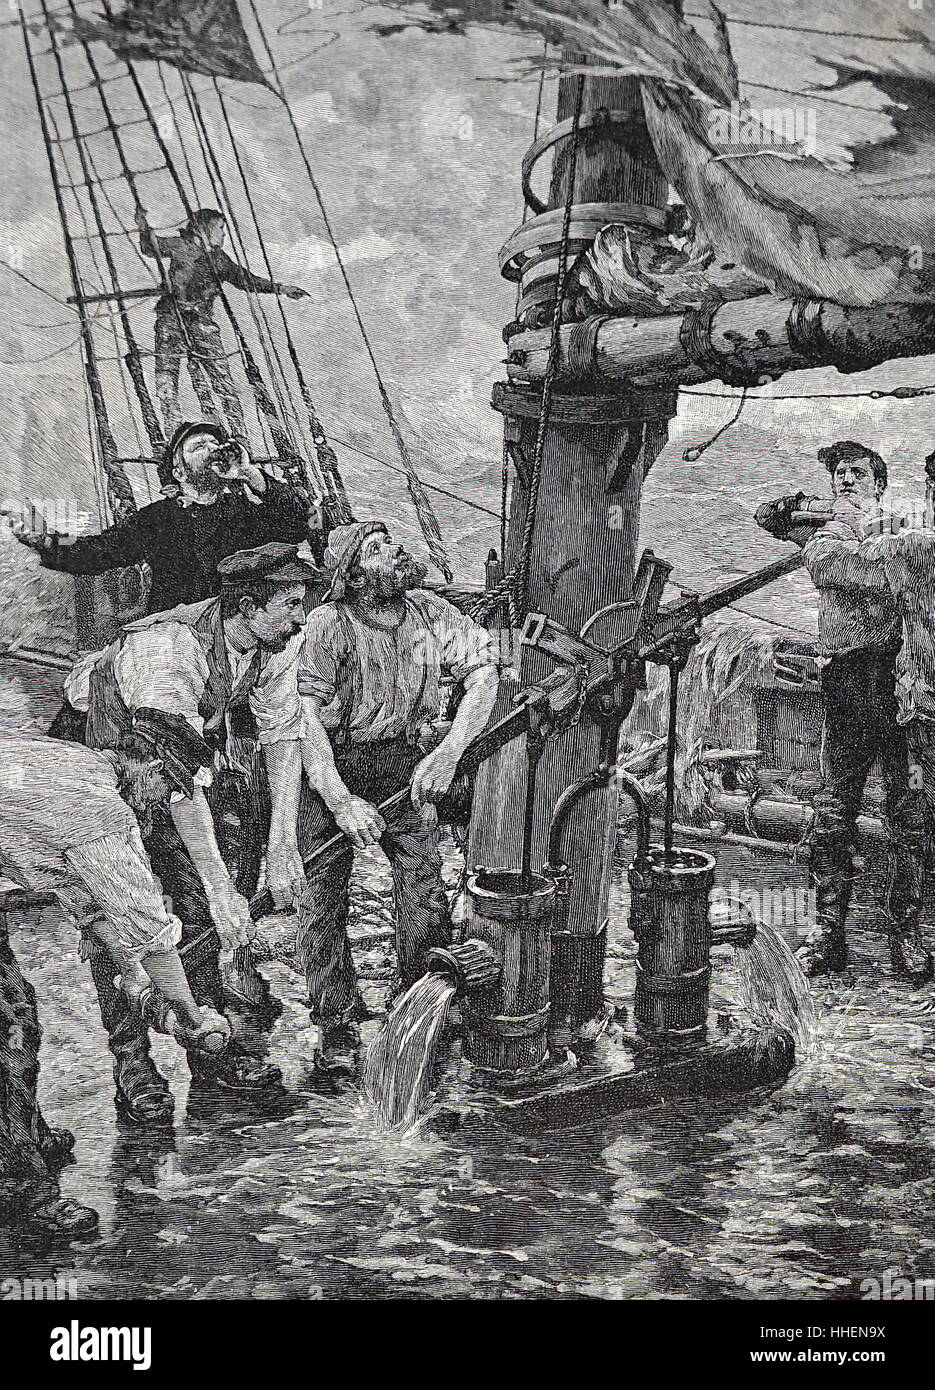 Illustration titled 'All Hands to the Pump' depicting crew members trying pump water off the deck of a sinking ship. Dated 19th Century Stock Photo